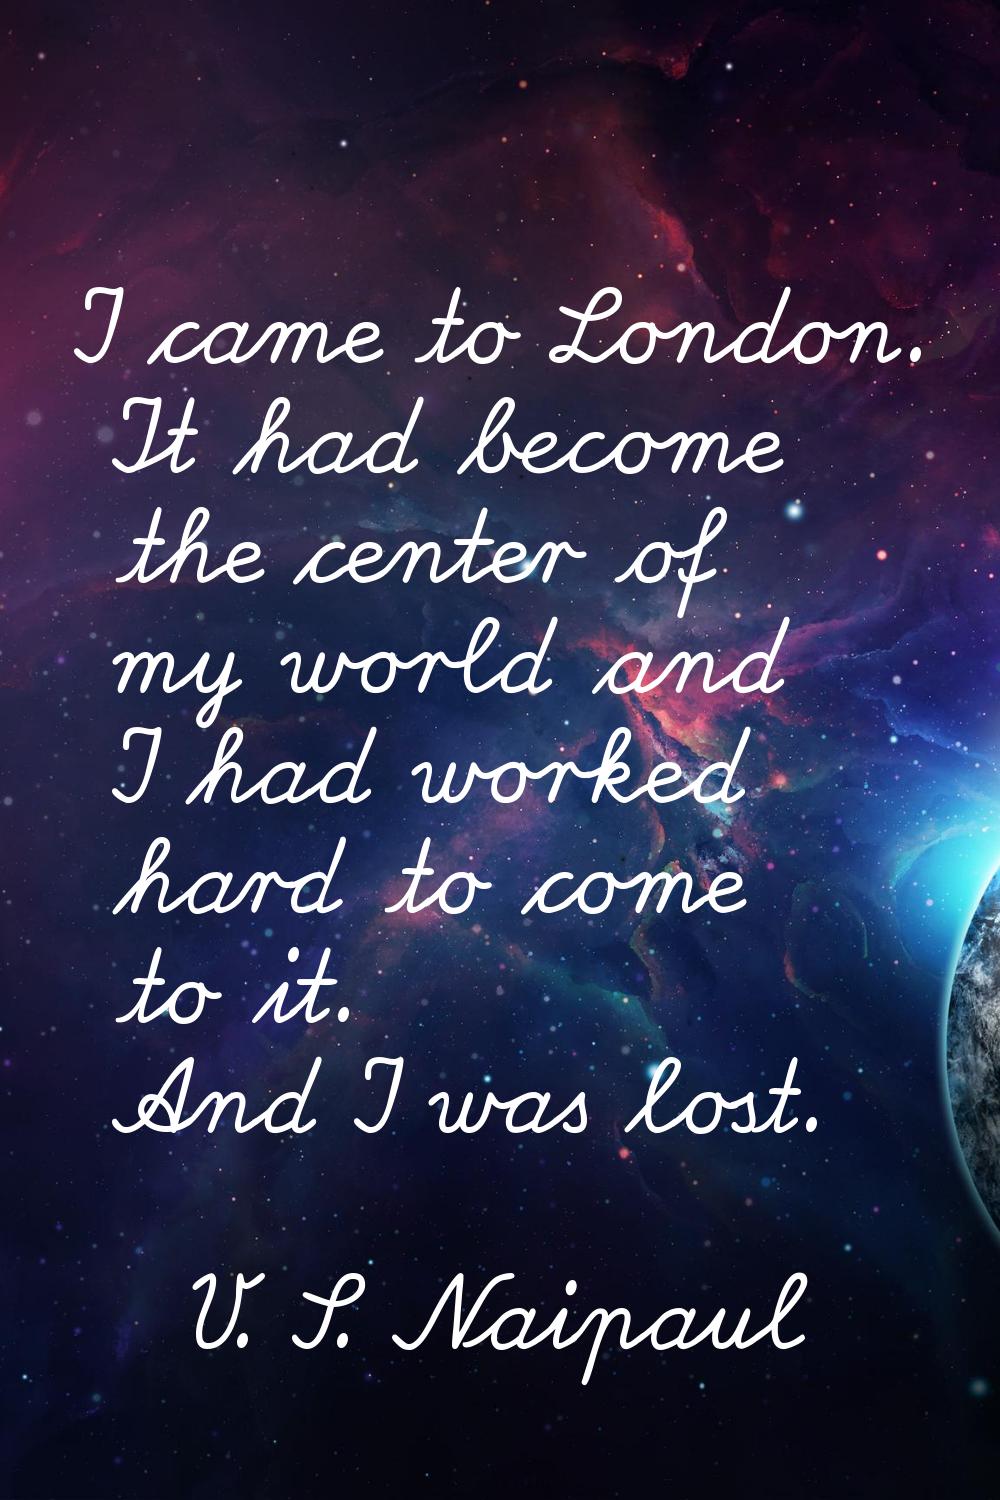 I came to London. It had become the center of my world and I had worked hard to come to it. And I w